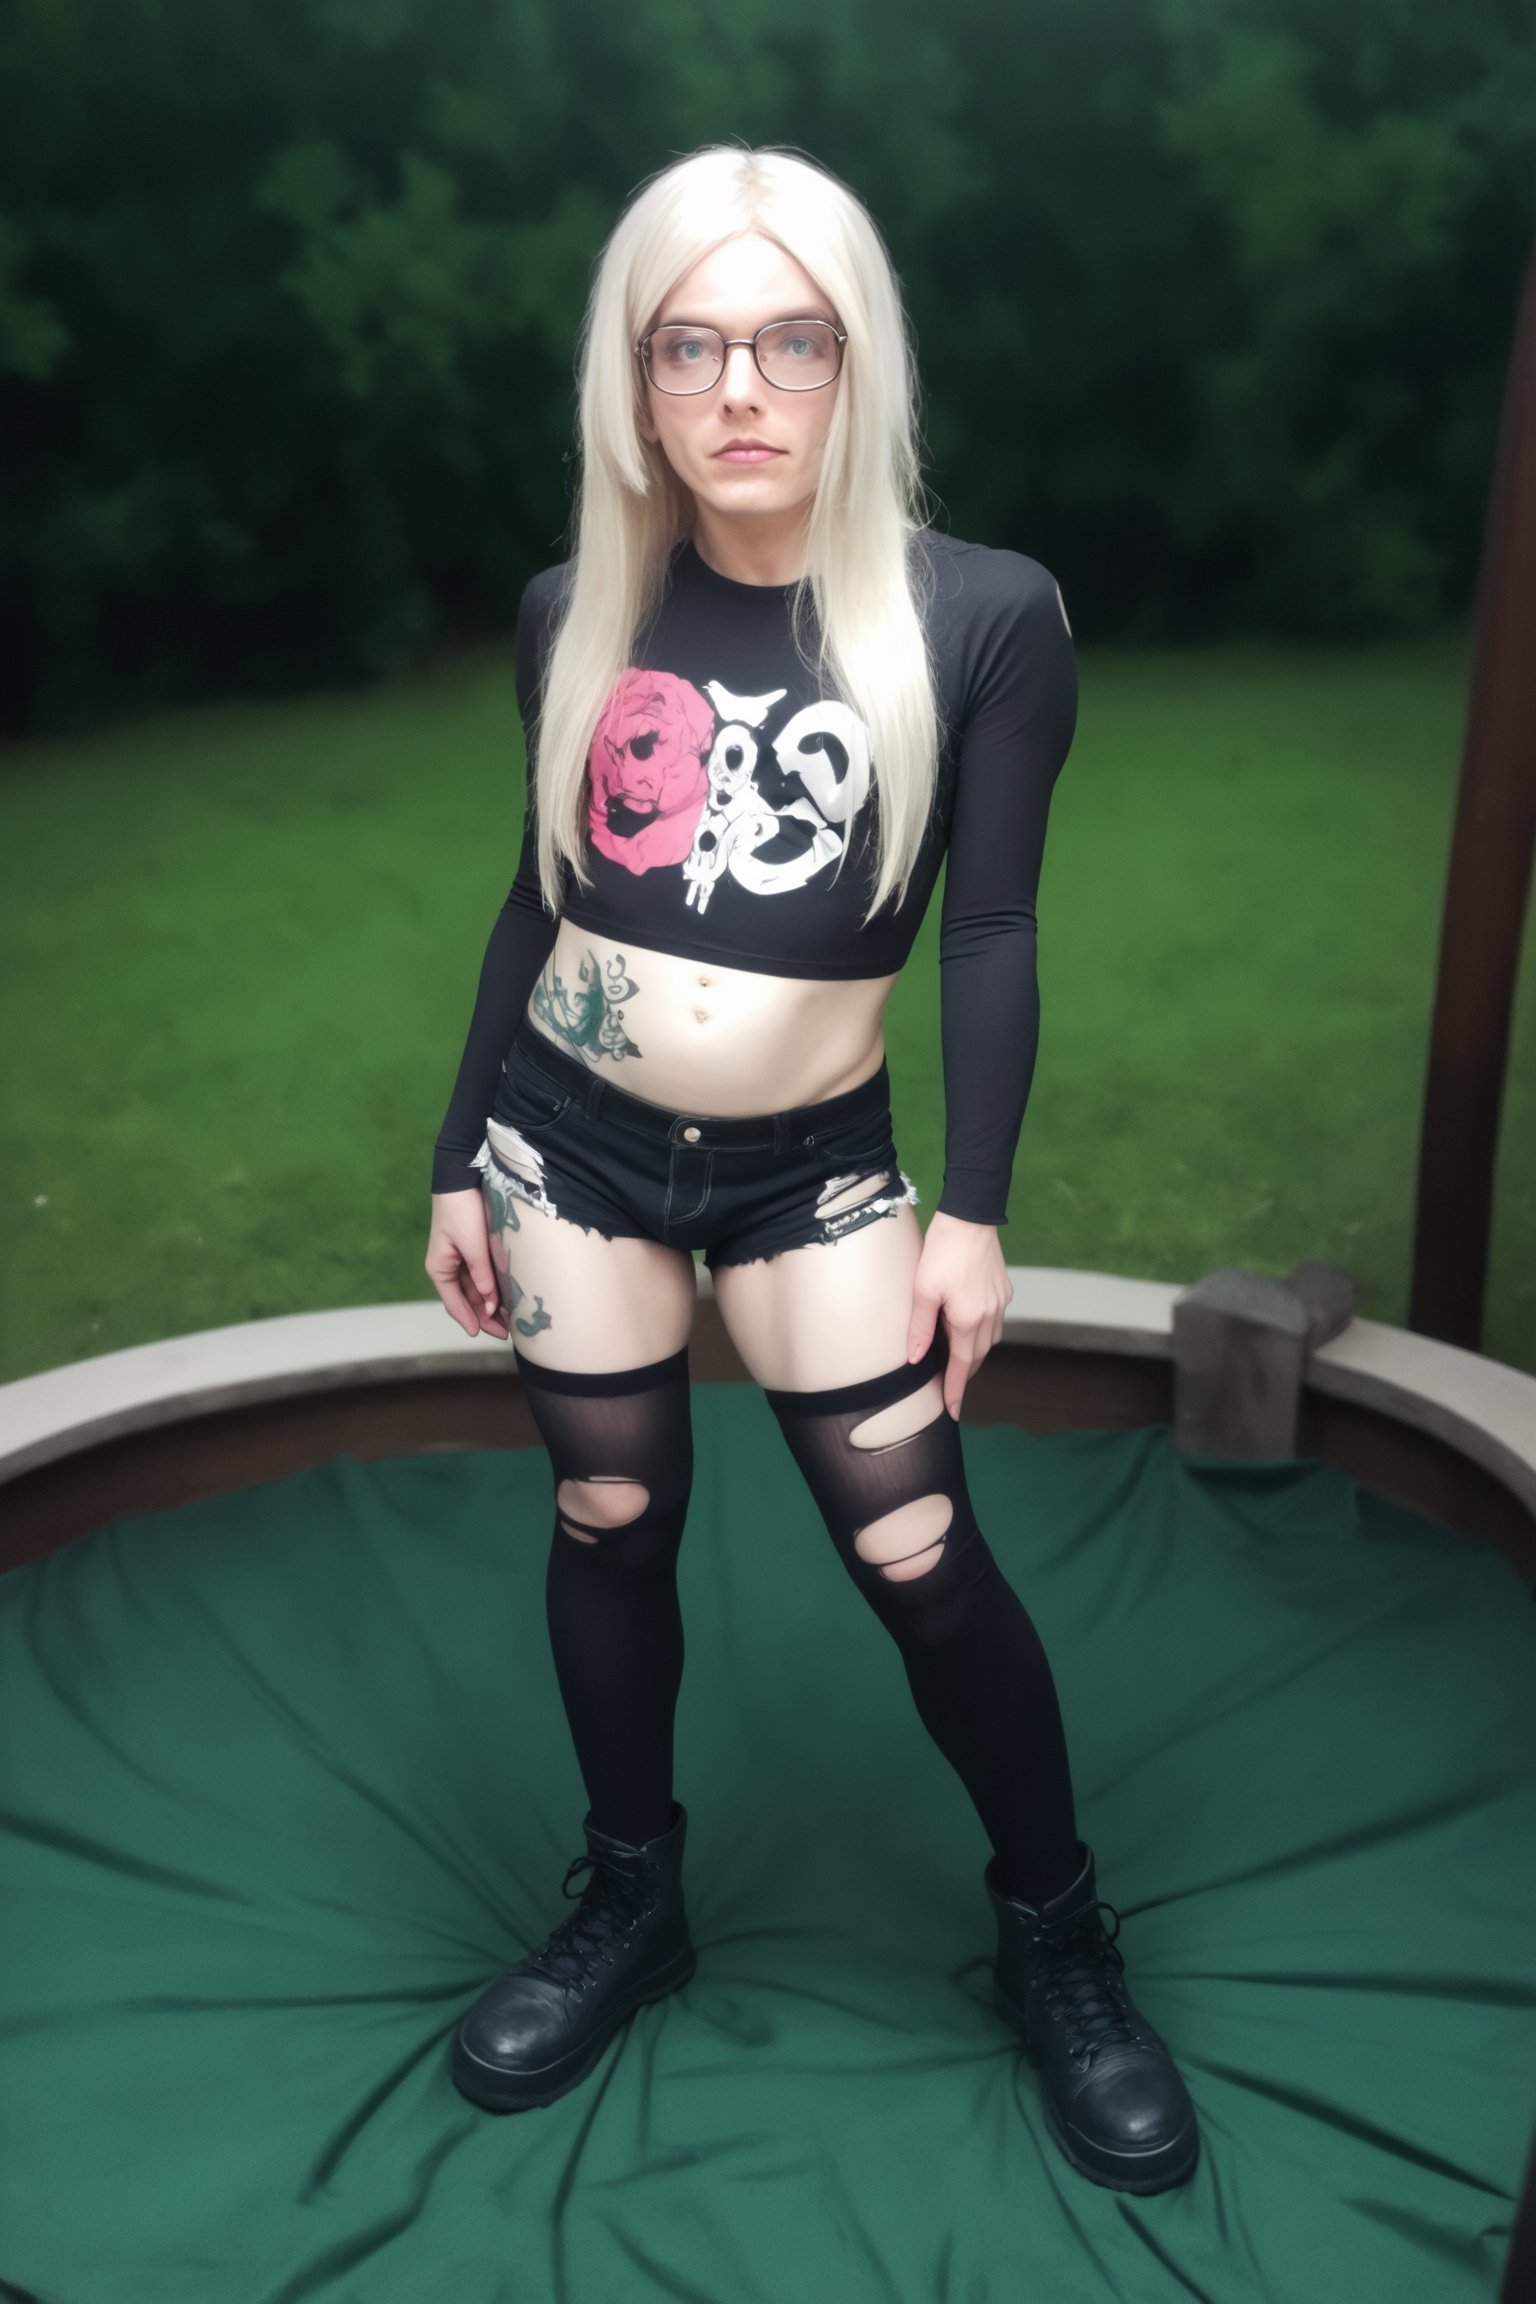 score_9,score_8_up, score_7_up, score_6_up,hyper realism, photo realistic, 8k, digital slr, full body photo, ophelia, solo, long hair, blonde with pink dyed ends, glasses,((tattoos, piercings)), looking at viewer, emo, tight band shirt, torn shorts, thigh highs, (((outdoors, gritty urban backdrop,bokeh))) ,pink-emo